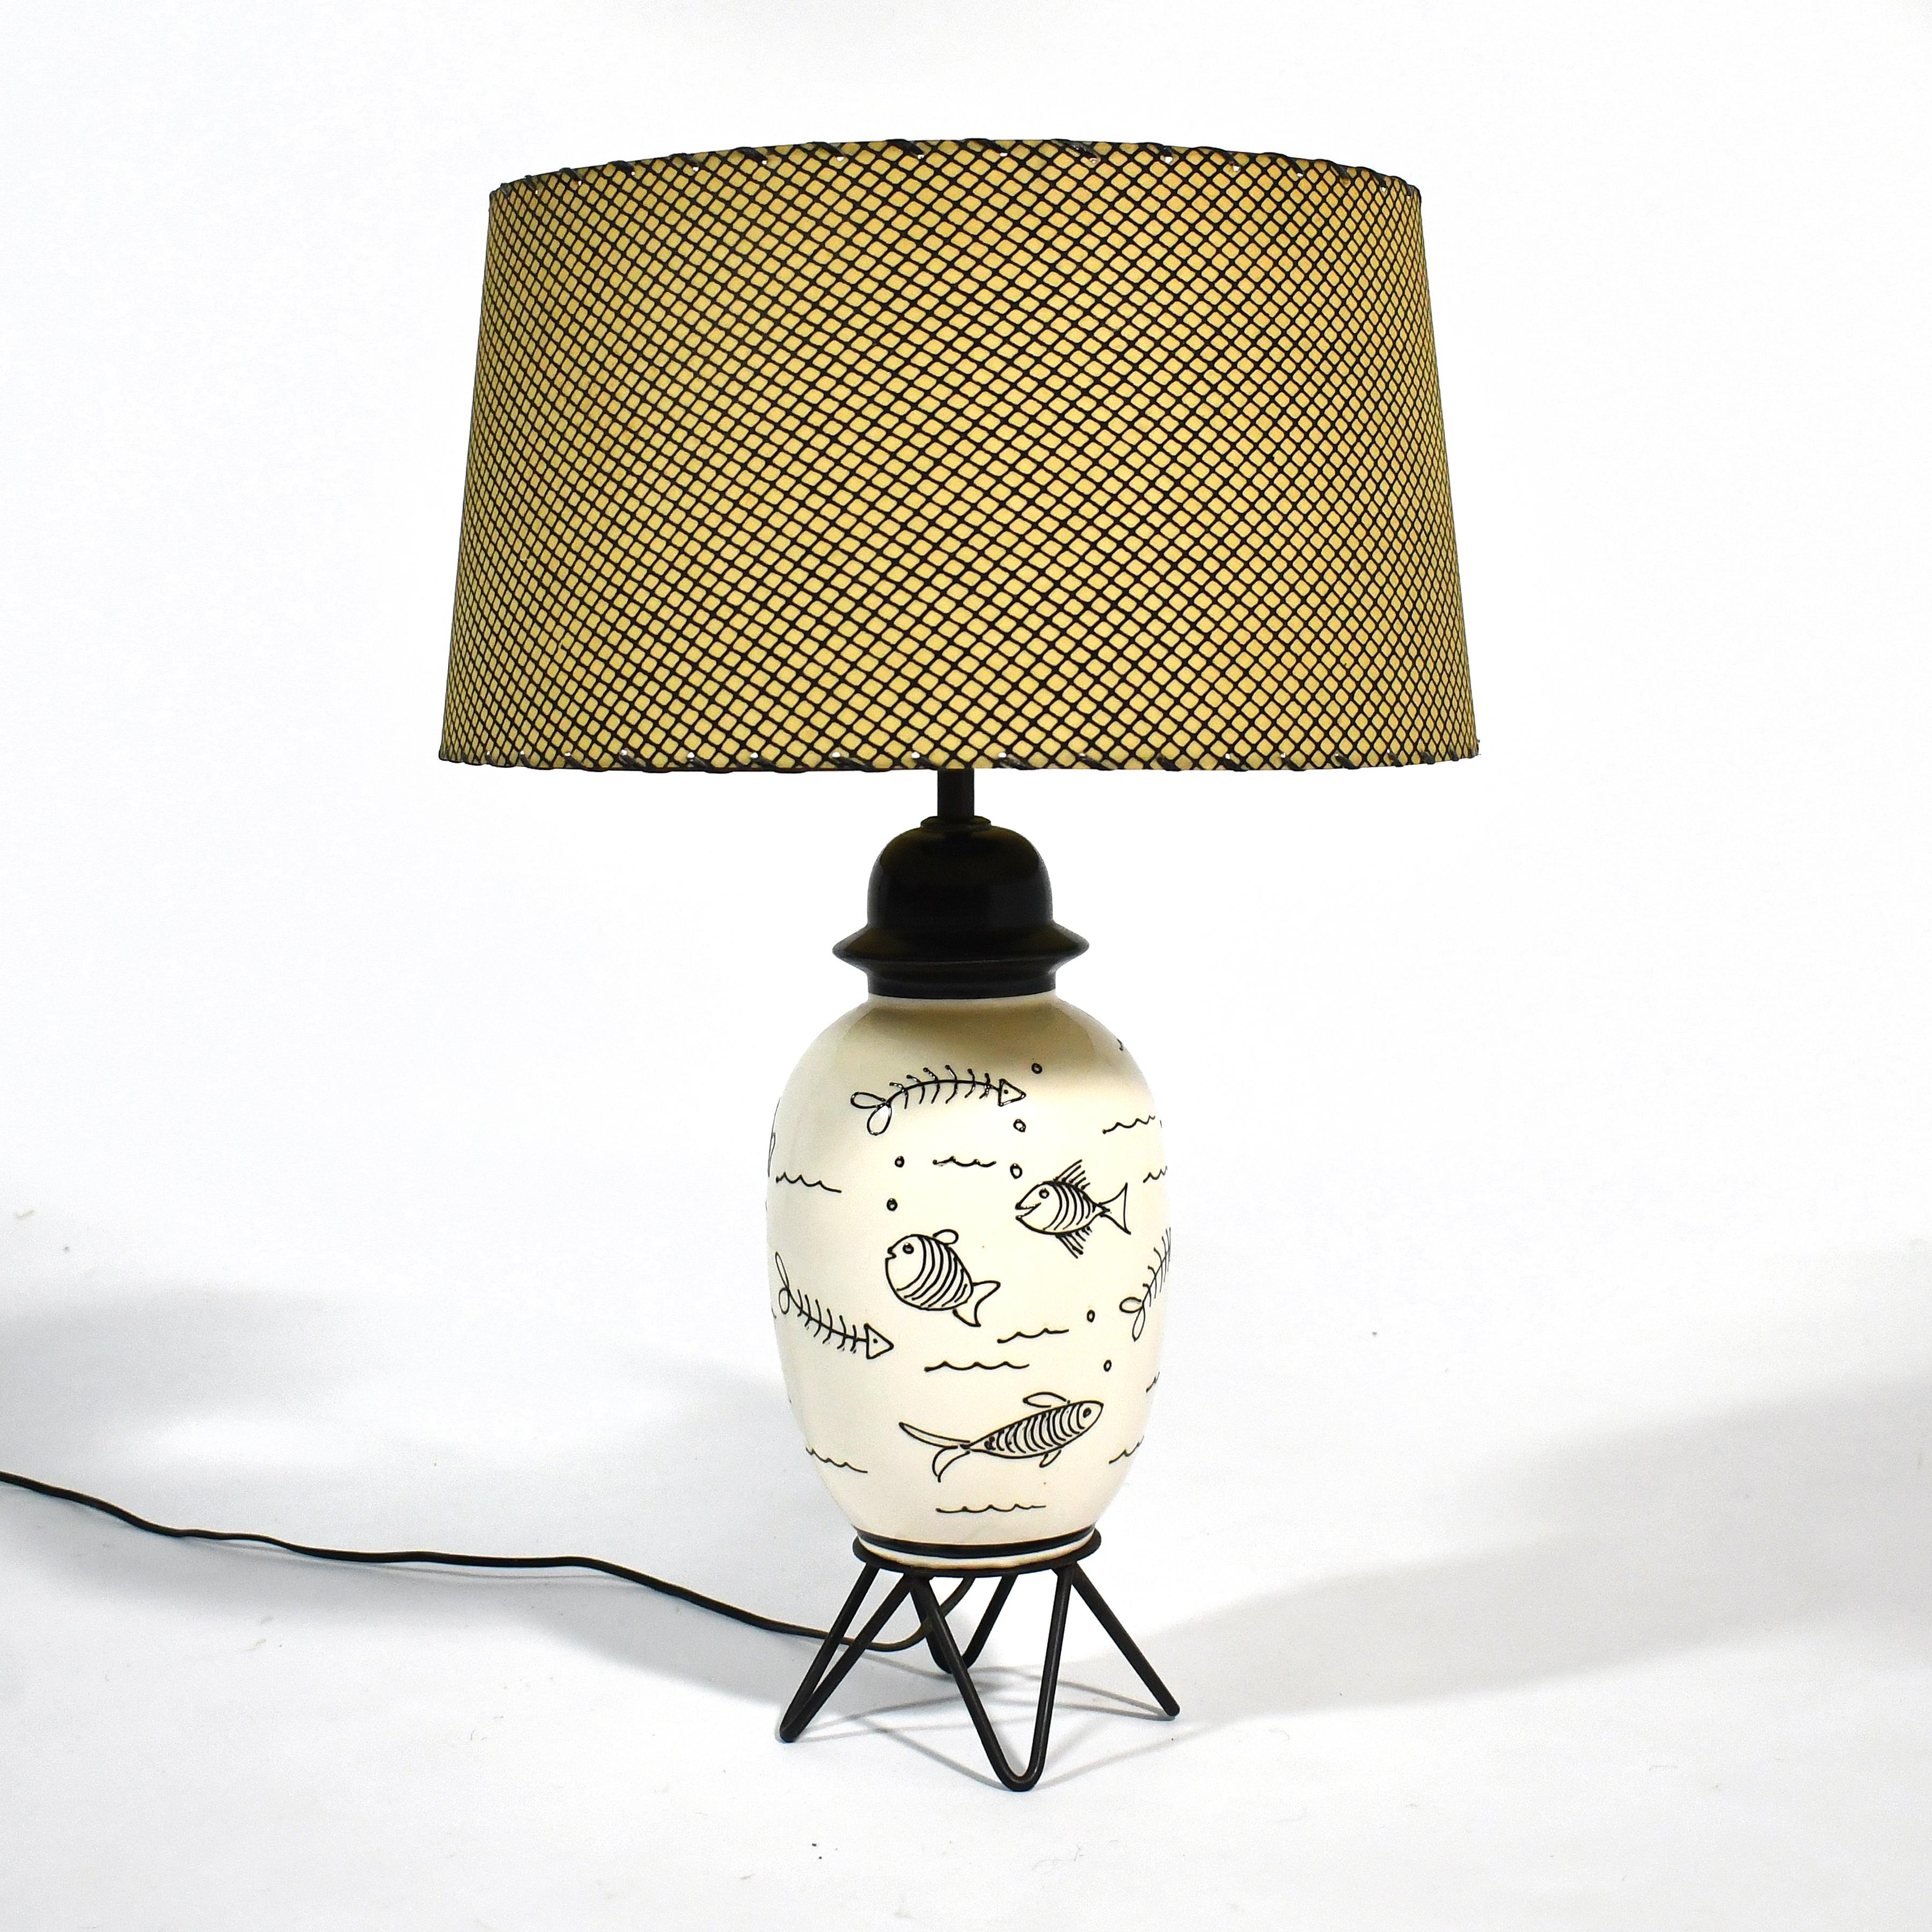 This playful table lamp has several qualities of 1950s design: the ceramic body has an urn-like form, is decorated with a whimsical fish design, and is supported by iron rod hair-pin legs. It is topped with a wonderful shade with a fishnet